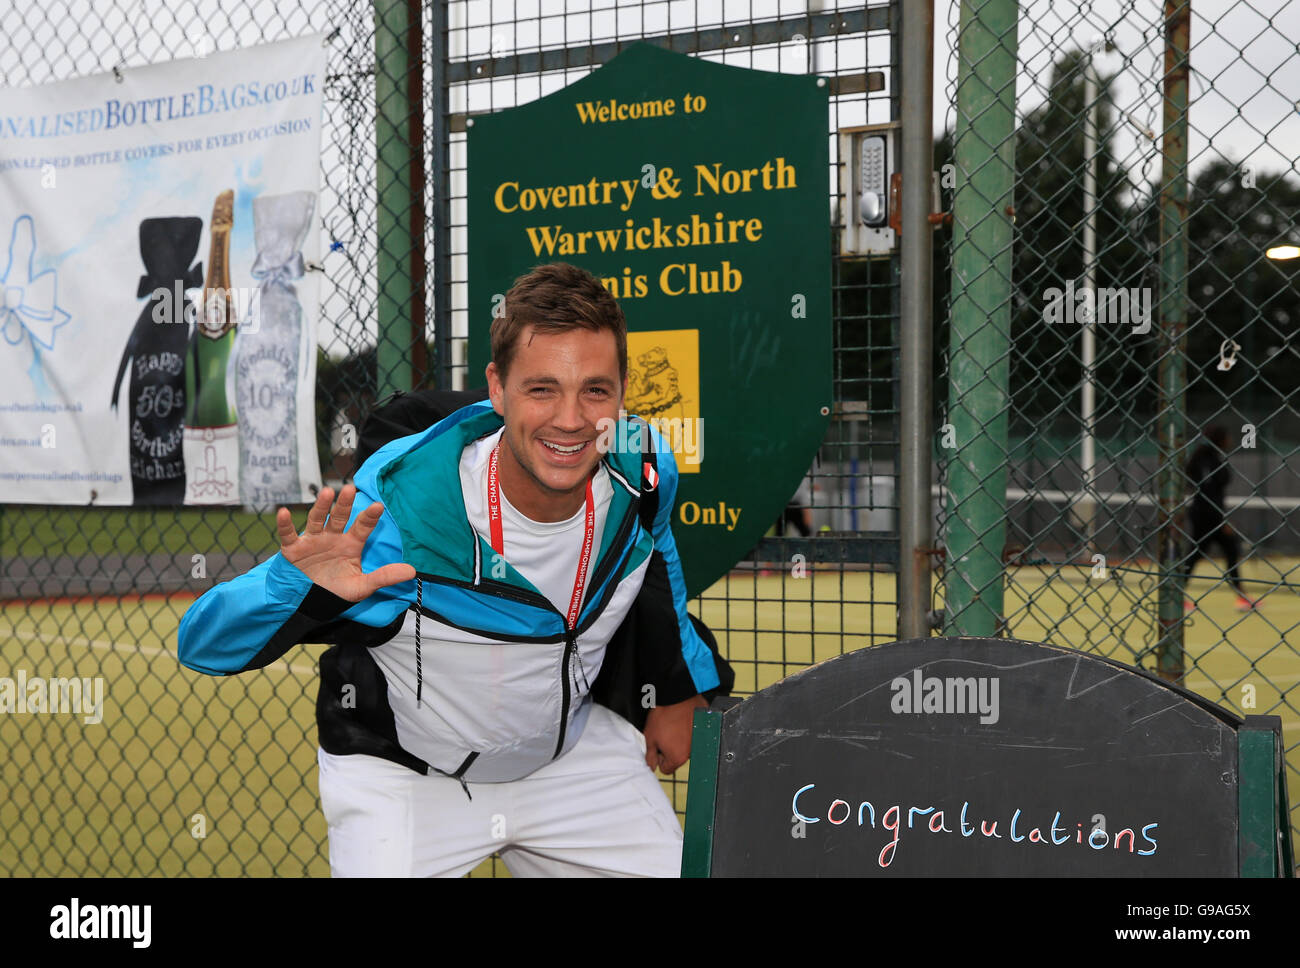 Marcus Willis poses for photos at Coventry and North Warwickshire Tennis Club, Coventry. PRESS ASSOCIATION Images. Photo credit should read: Tim Goode/PA Wire Stock Photo